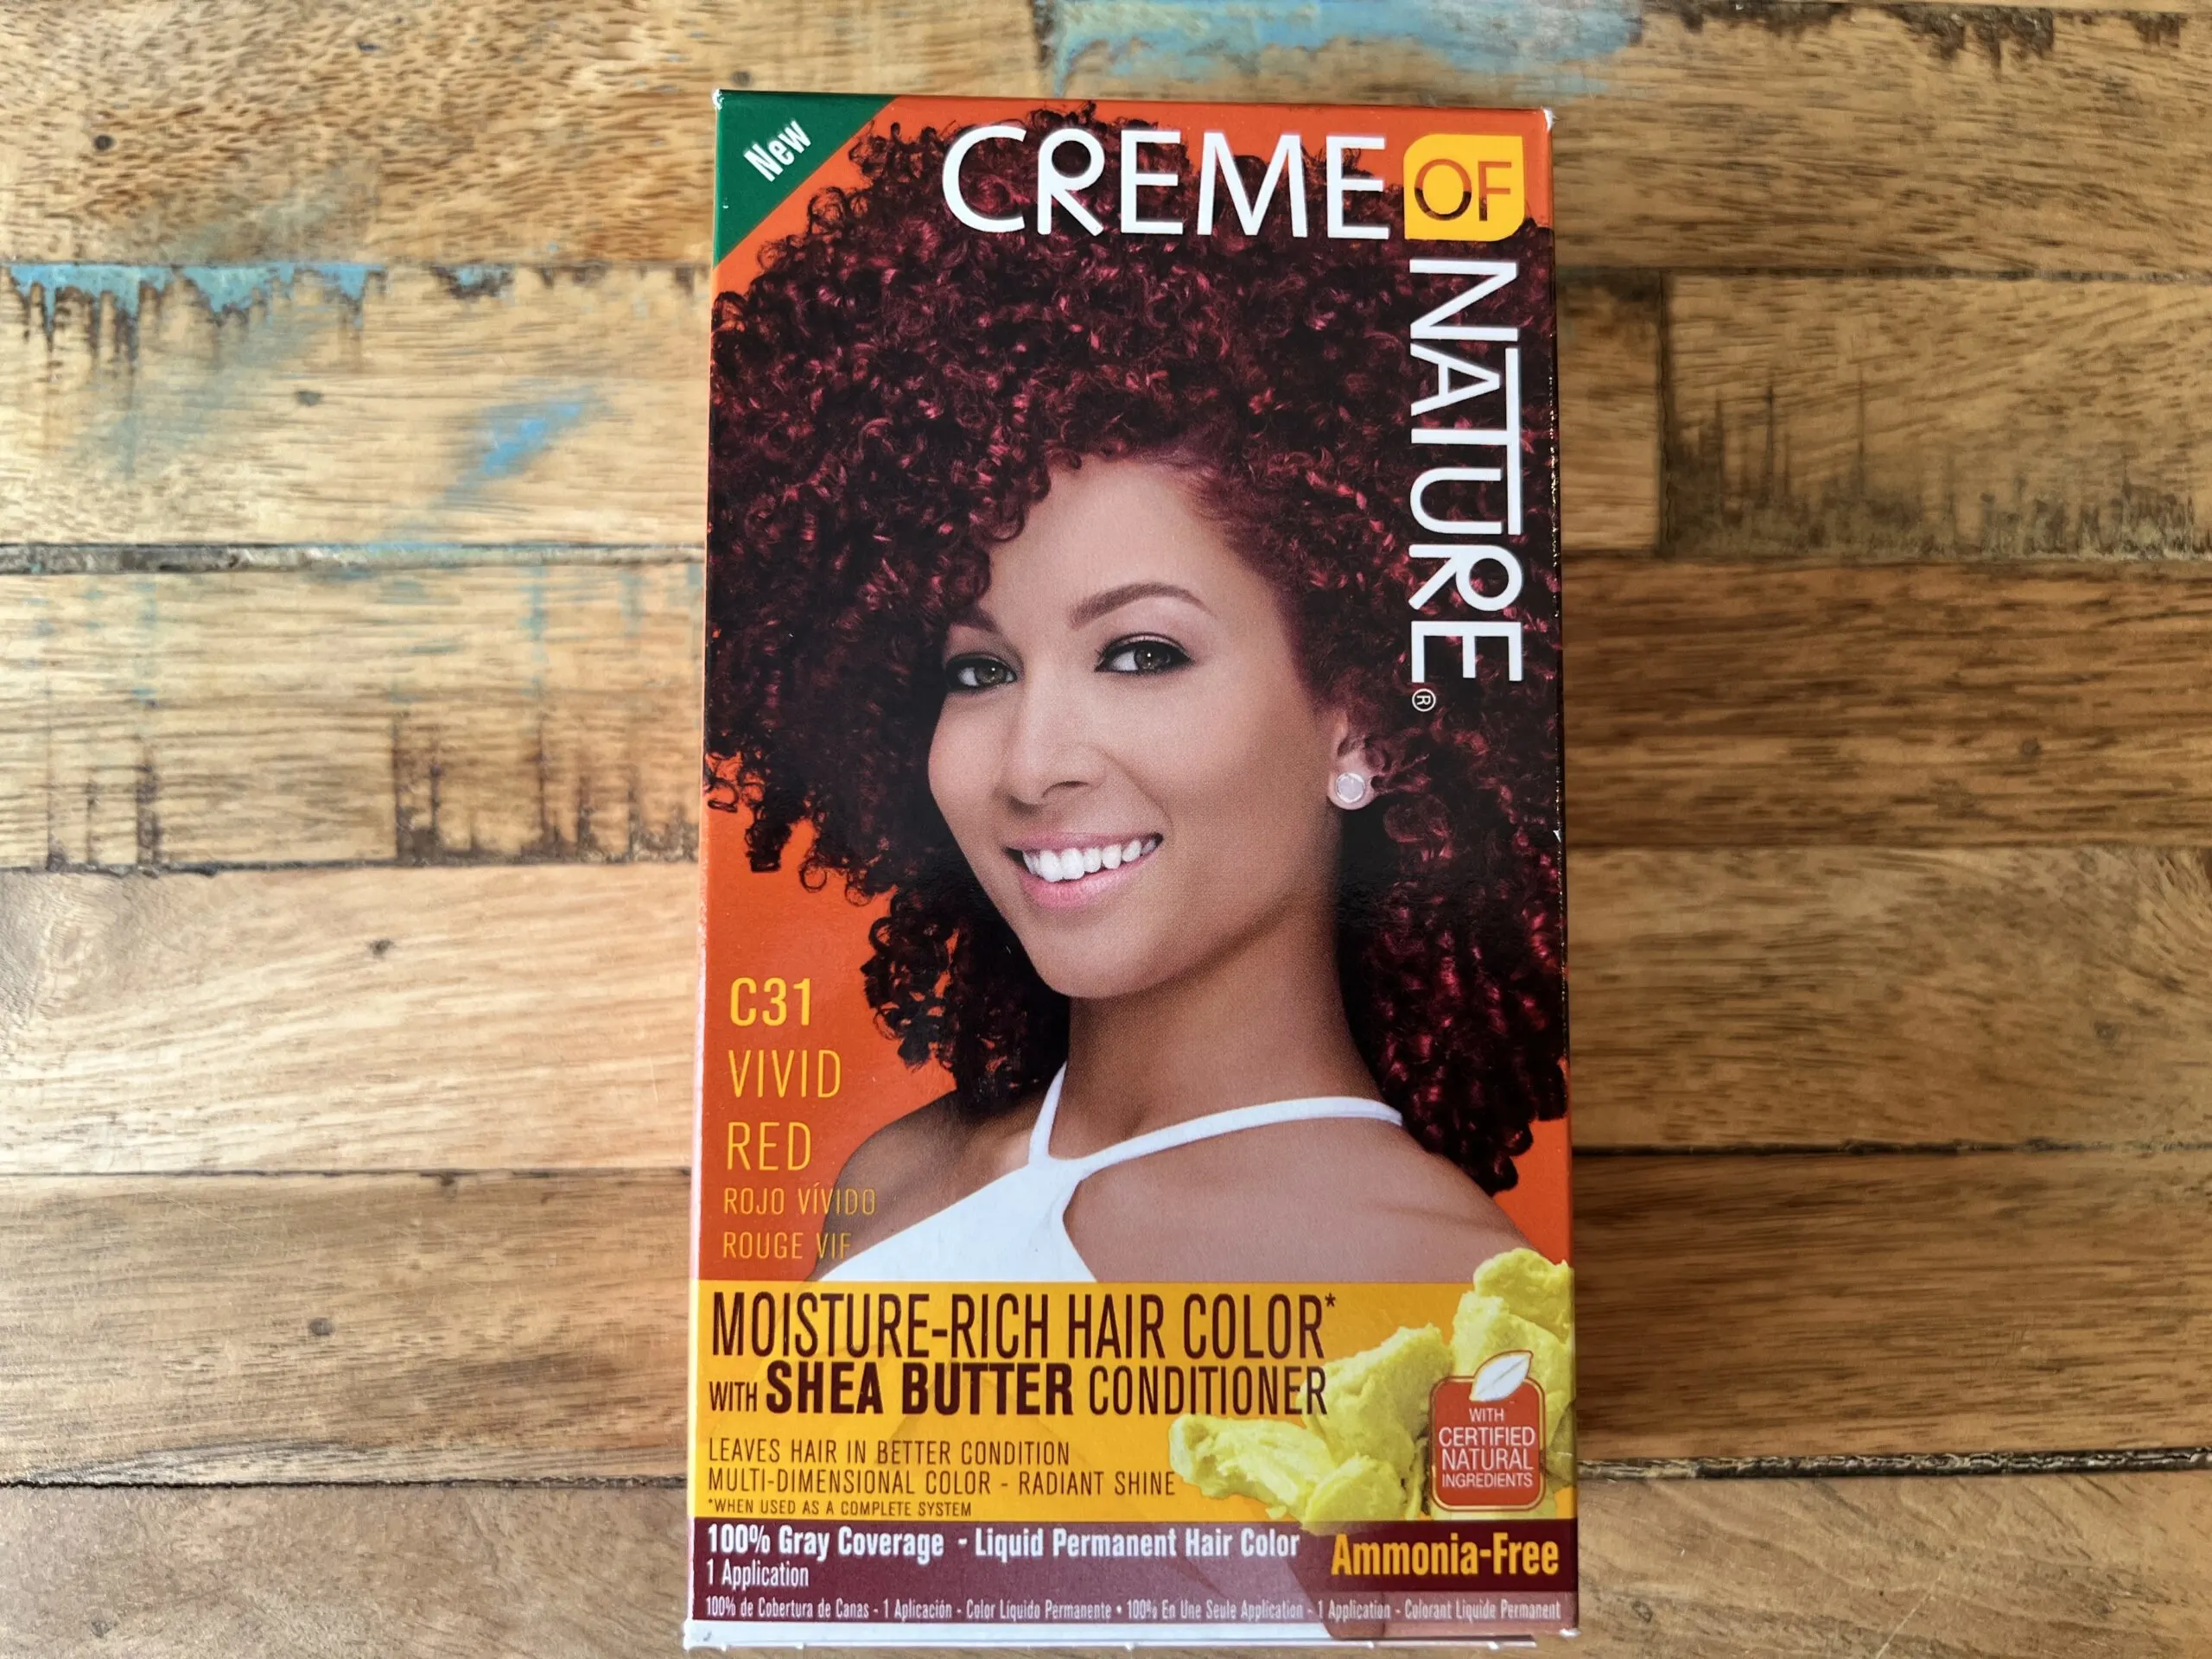 This box of ammonia-free Creme of Nature C31 Vivid Red is a moisture-rich hair color that includes a shea butter conditioner leaving your hair in better condition. The liquid-permanent hair color provides 100% gray coverage and uses certified natural ingredients.